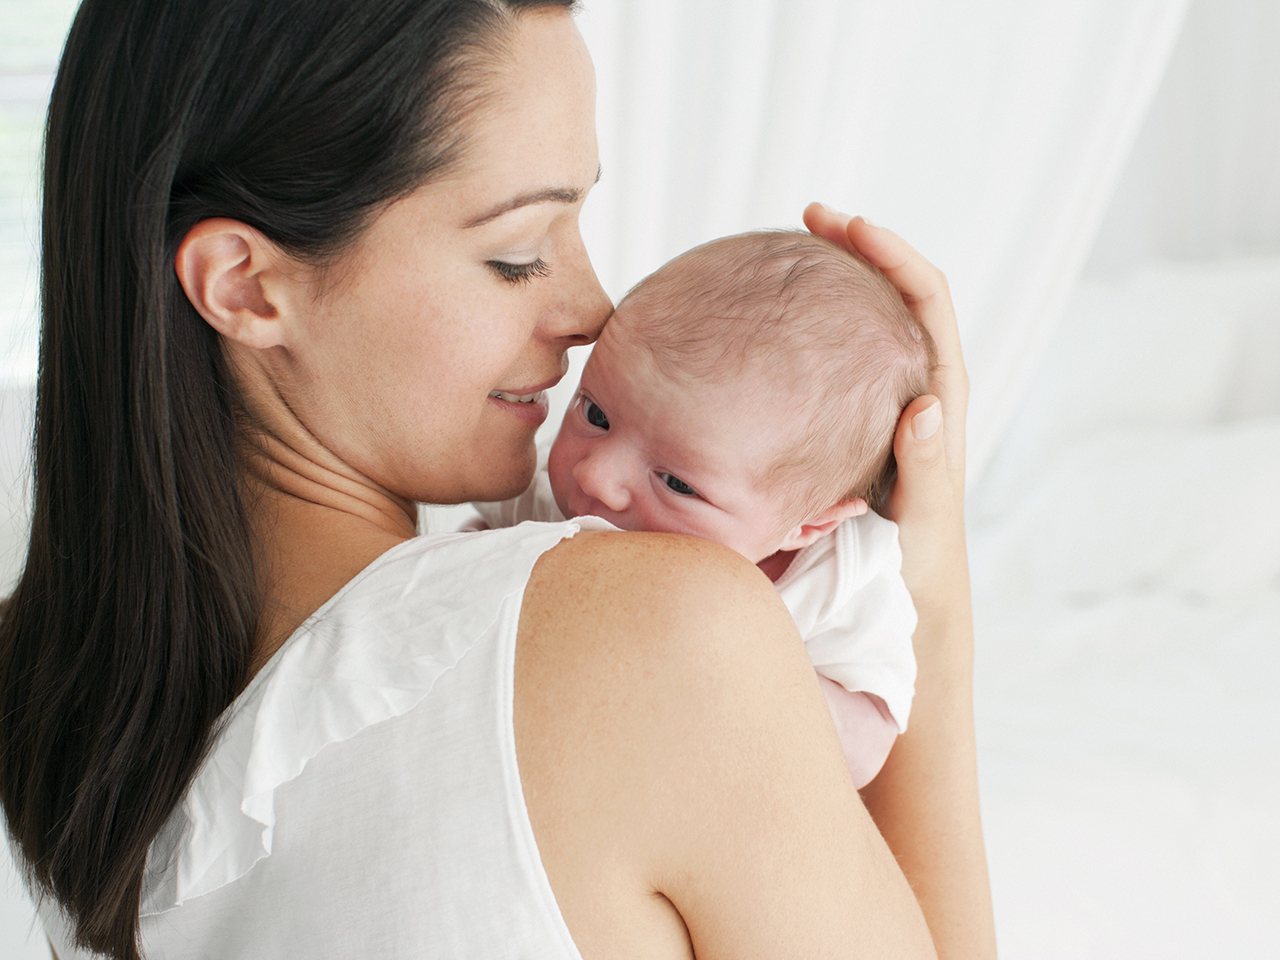 The scent of a newborn baby has a positive impact on the mother